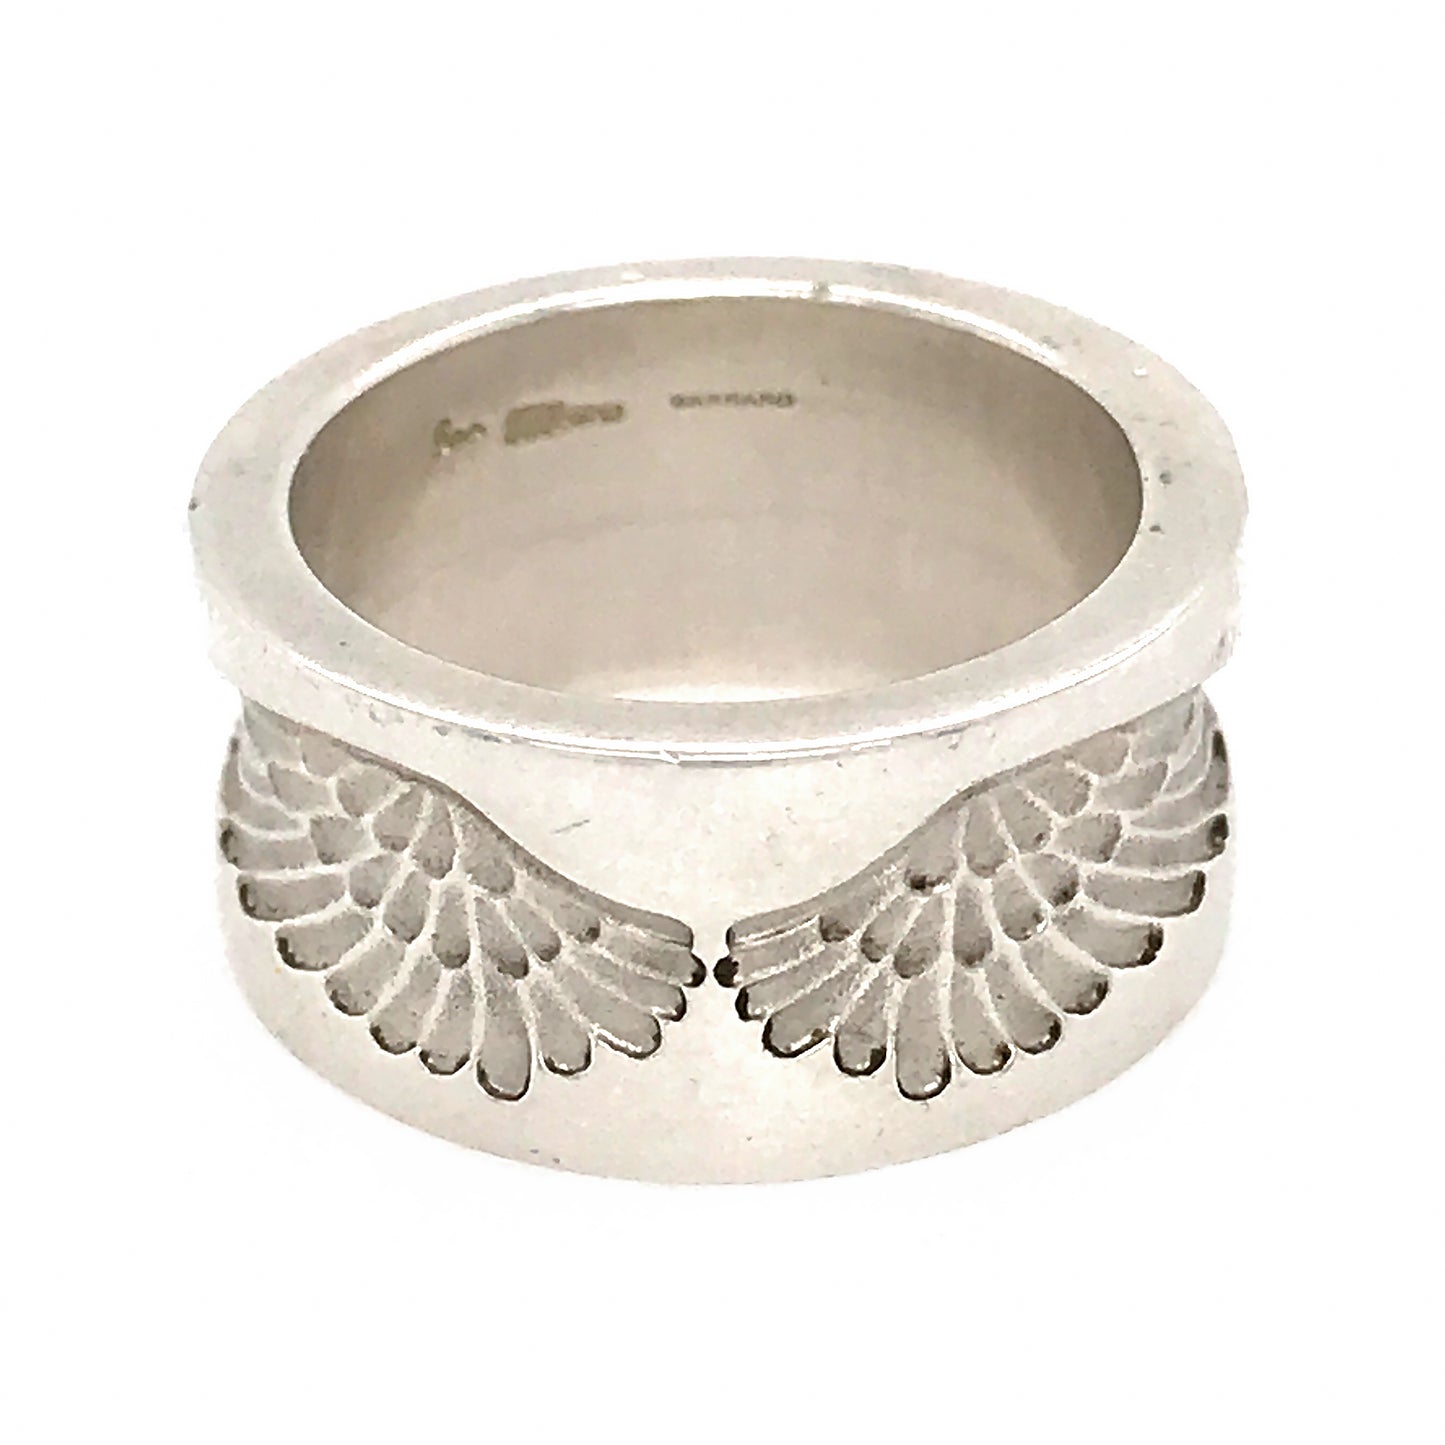 Garrard by Jade Jagger Winged Ring in Sterling Silver